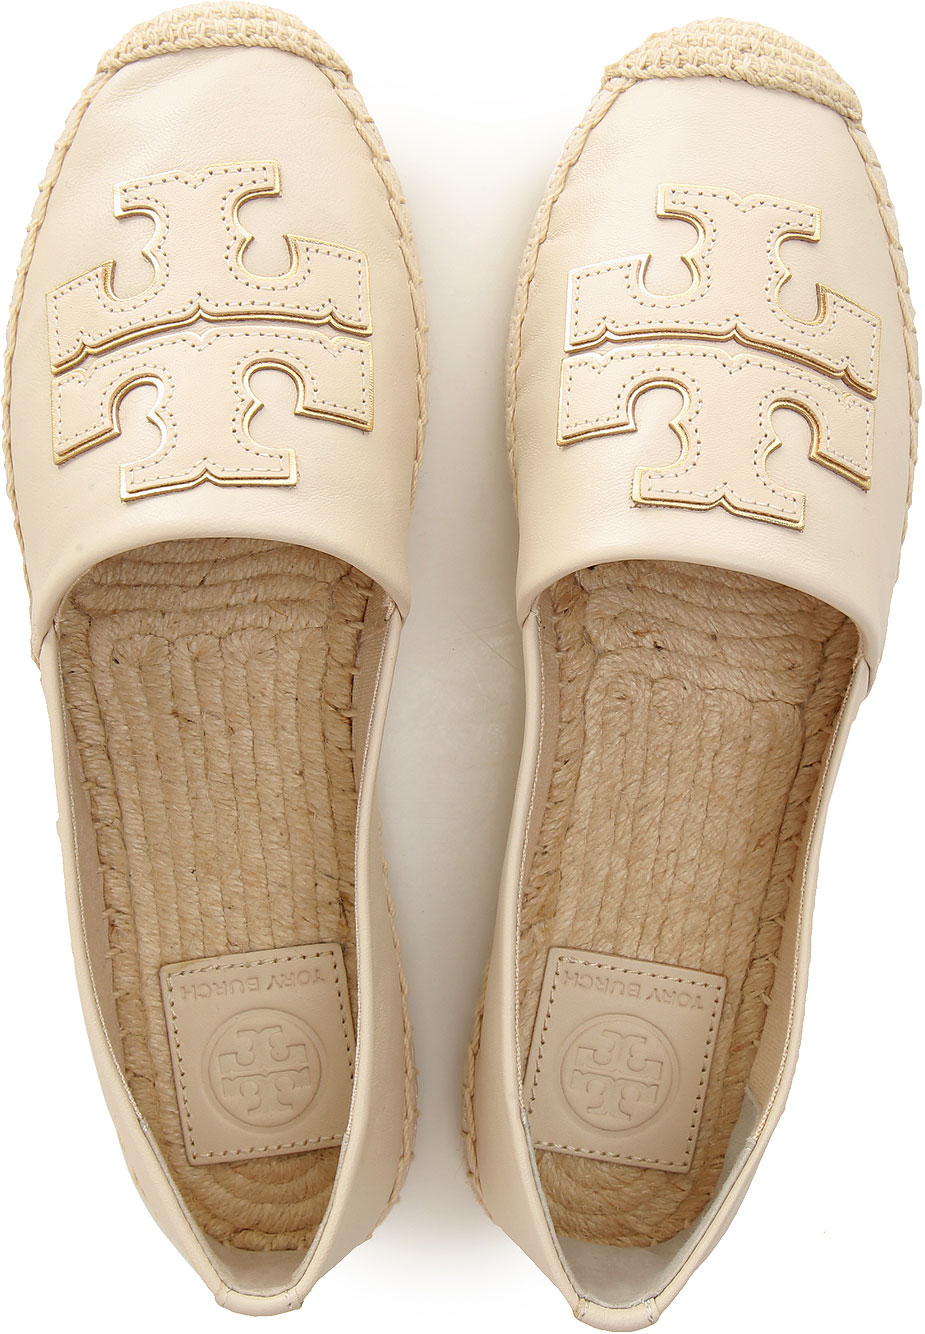 Womens Shoes Tory Burch Style Code 52035 107 3447